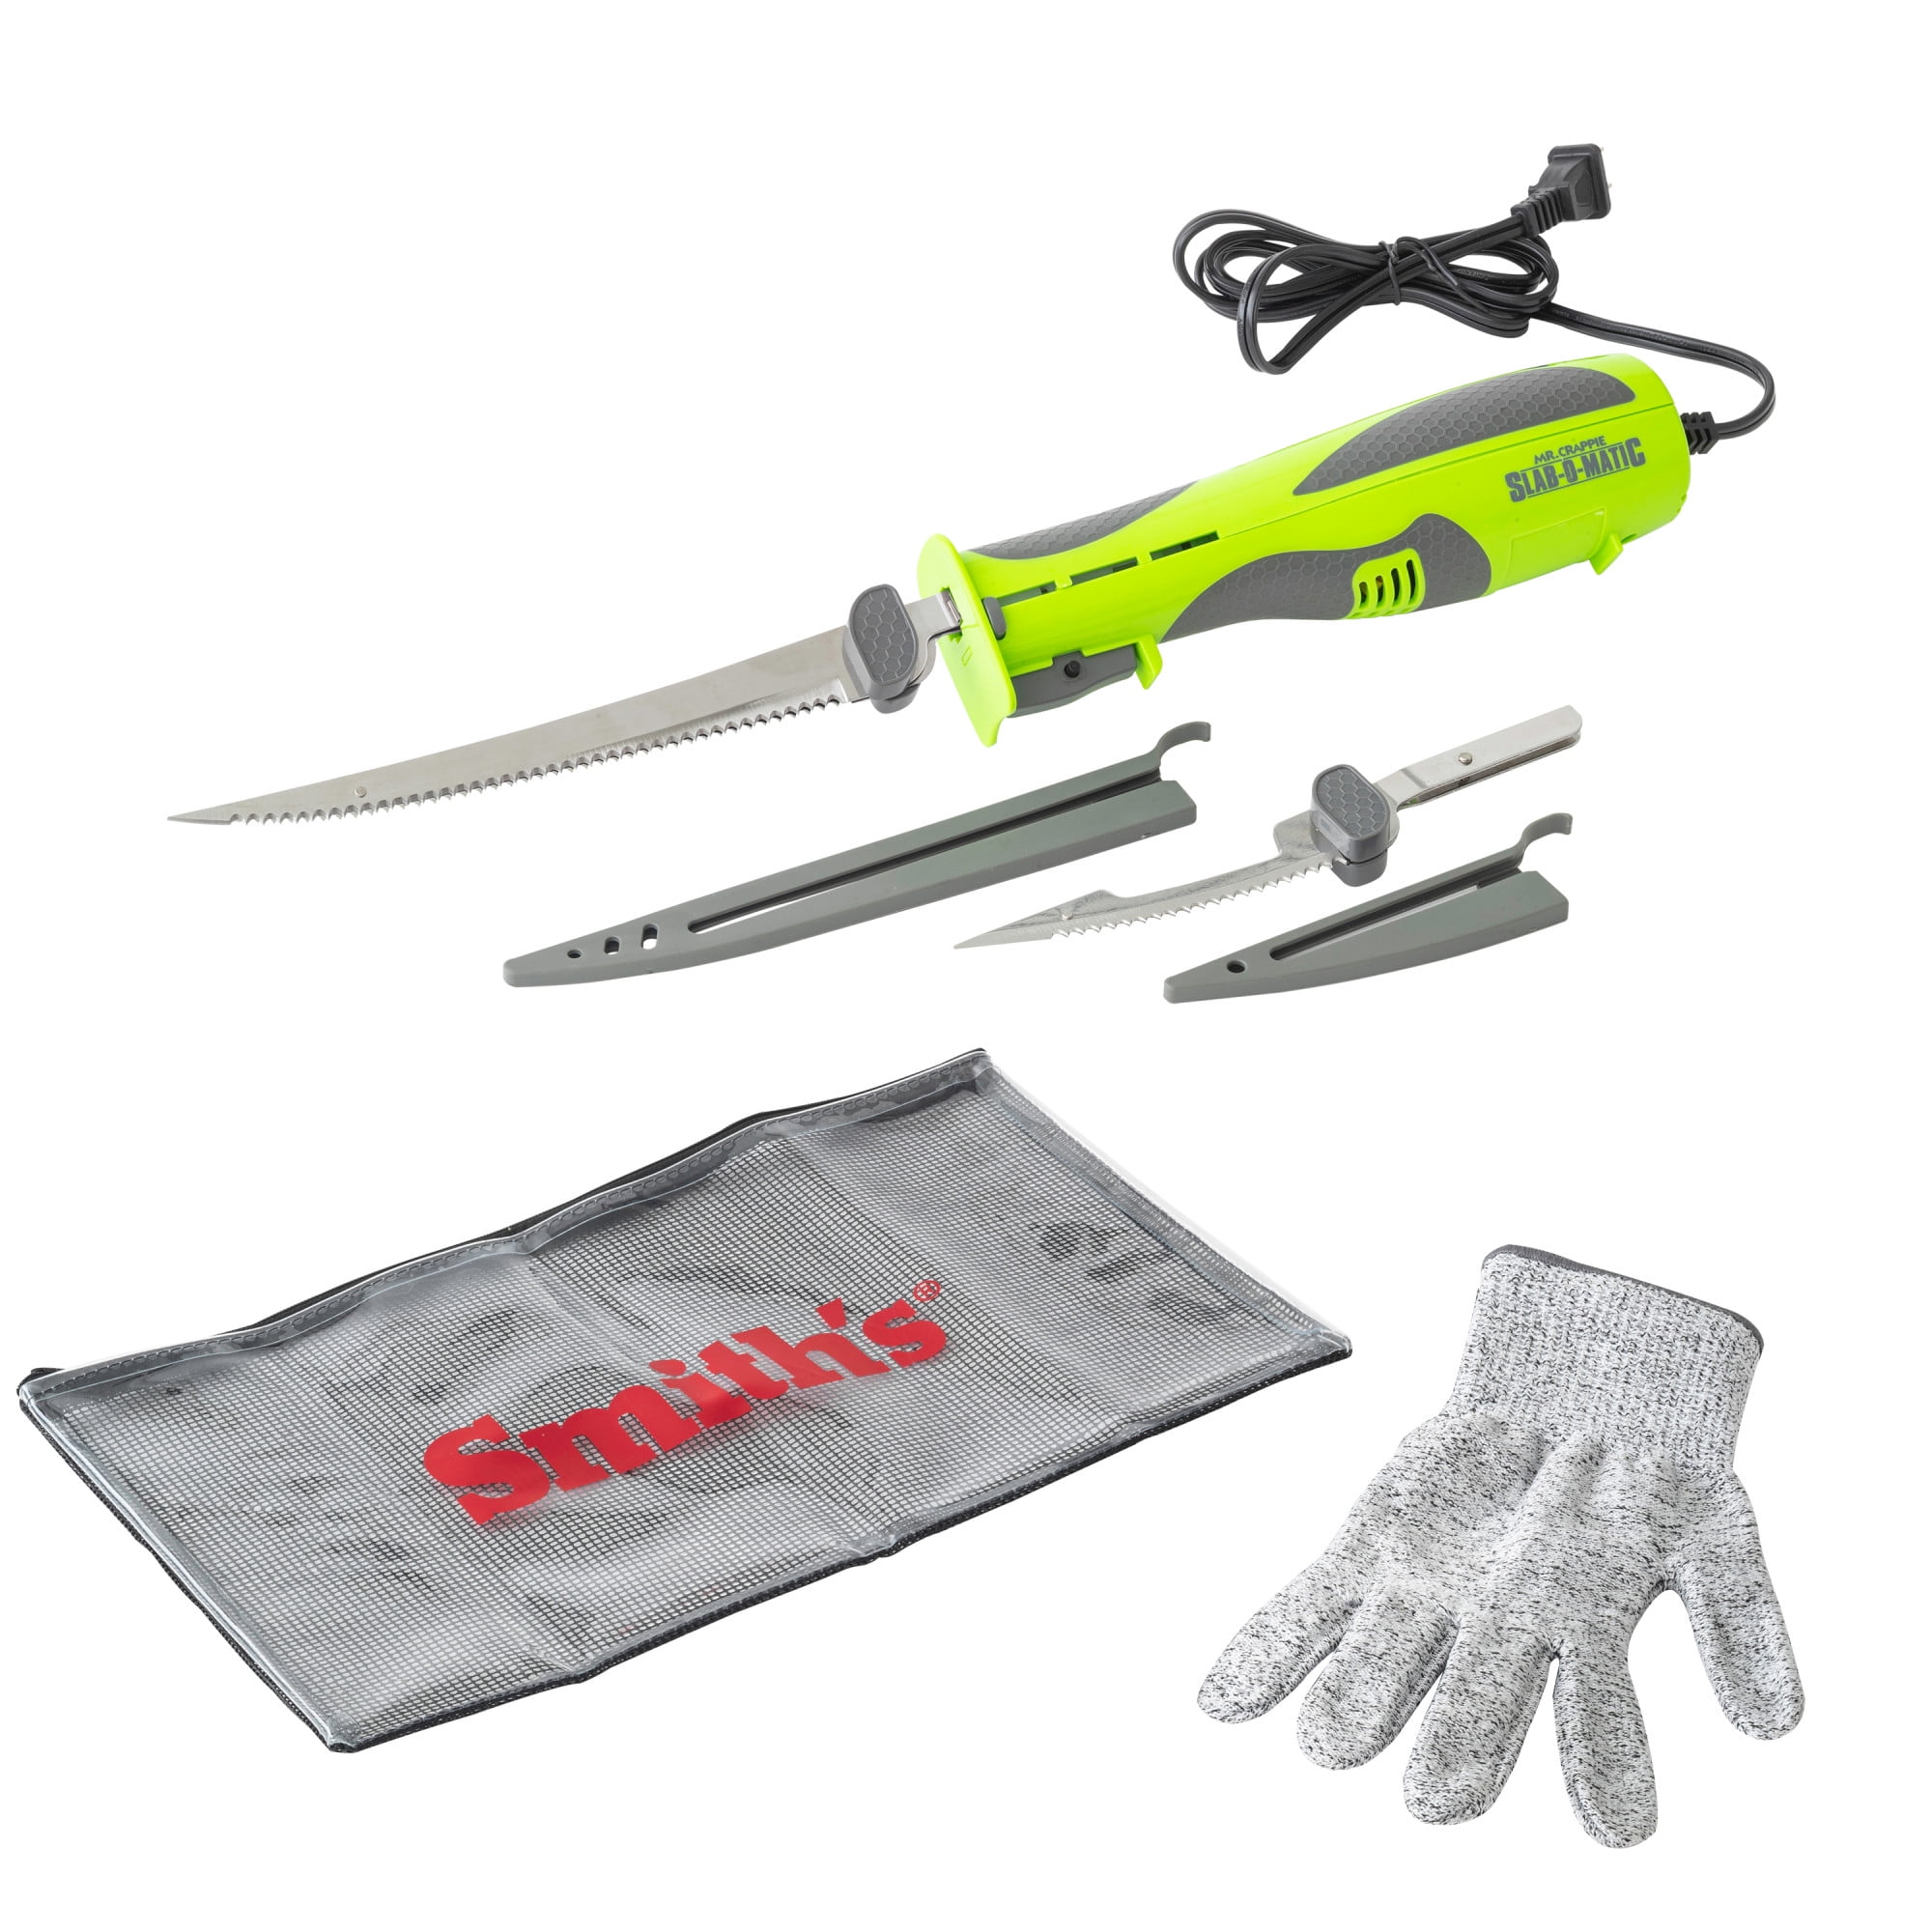 Rapala Lithium Ion Cordless Fillet Knife Combo 